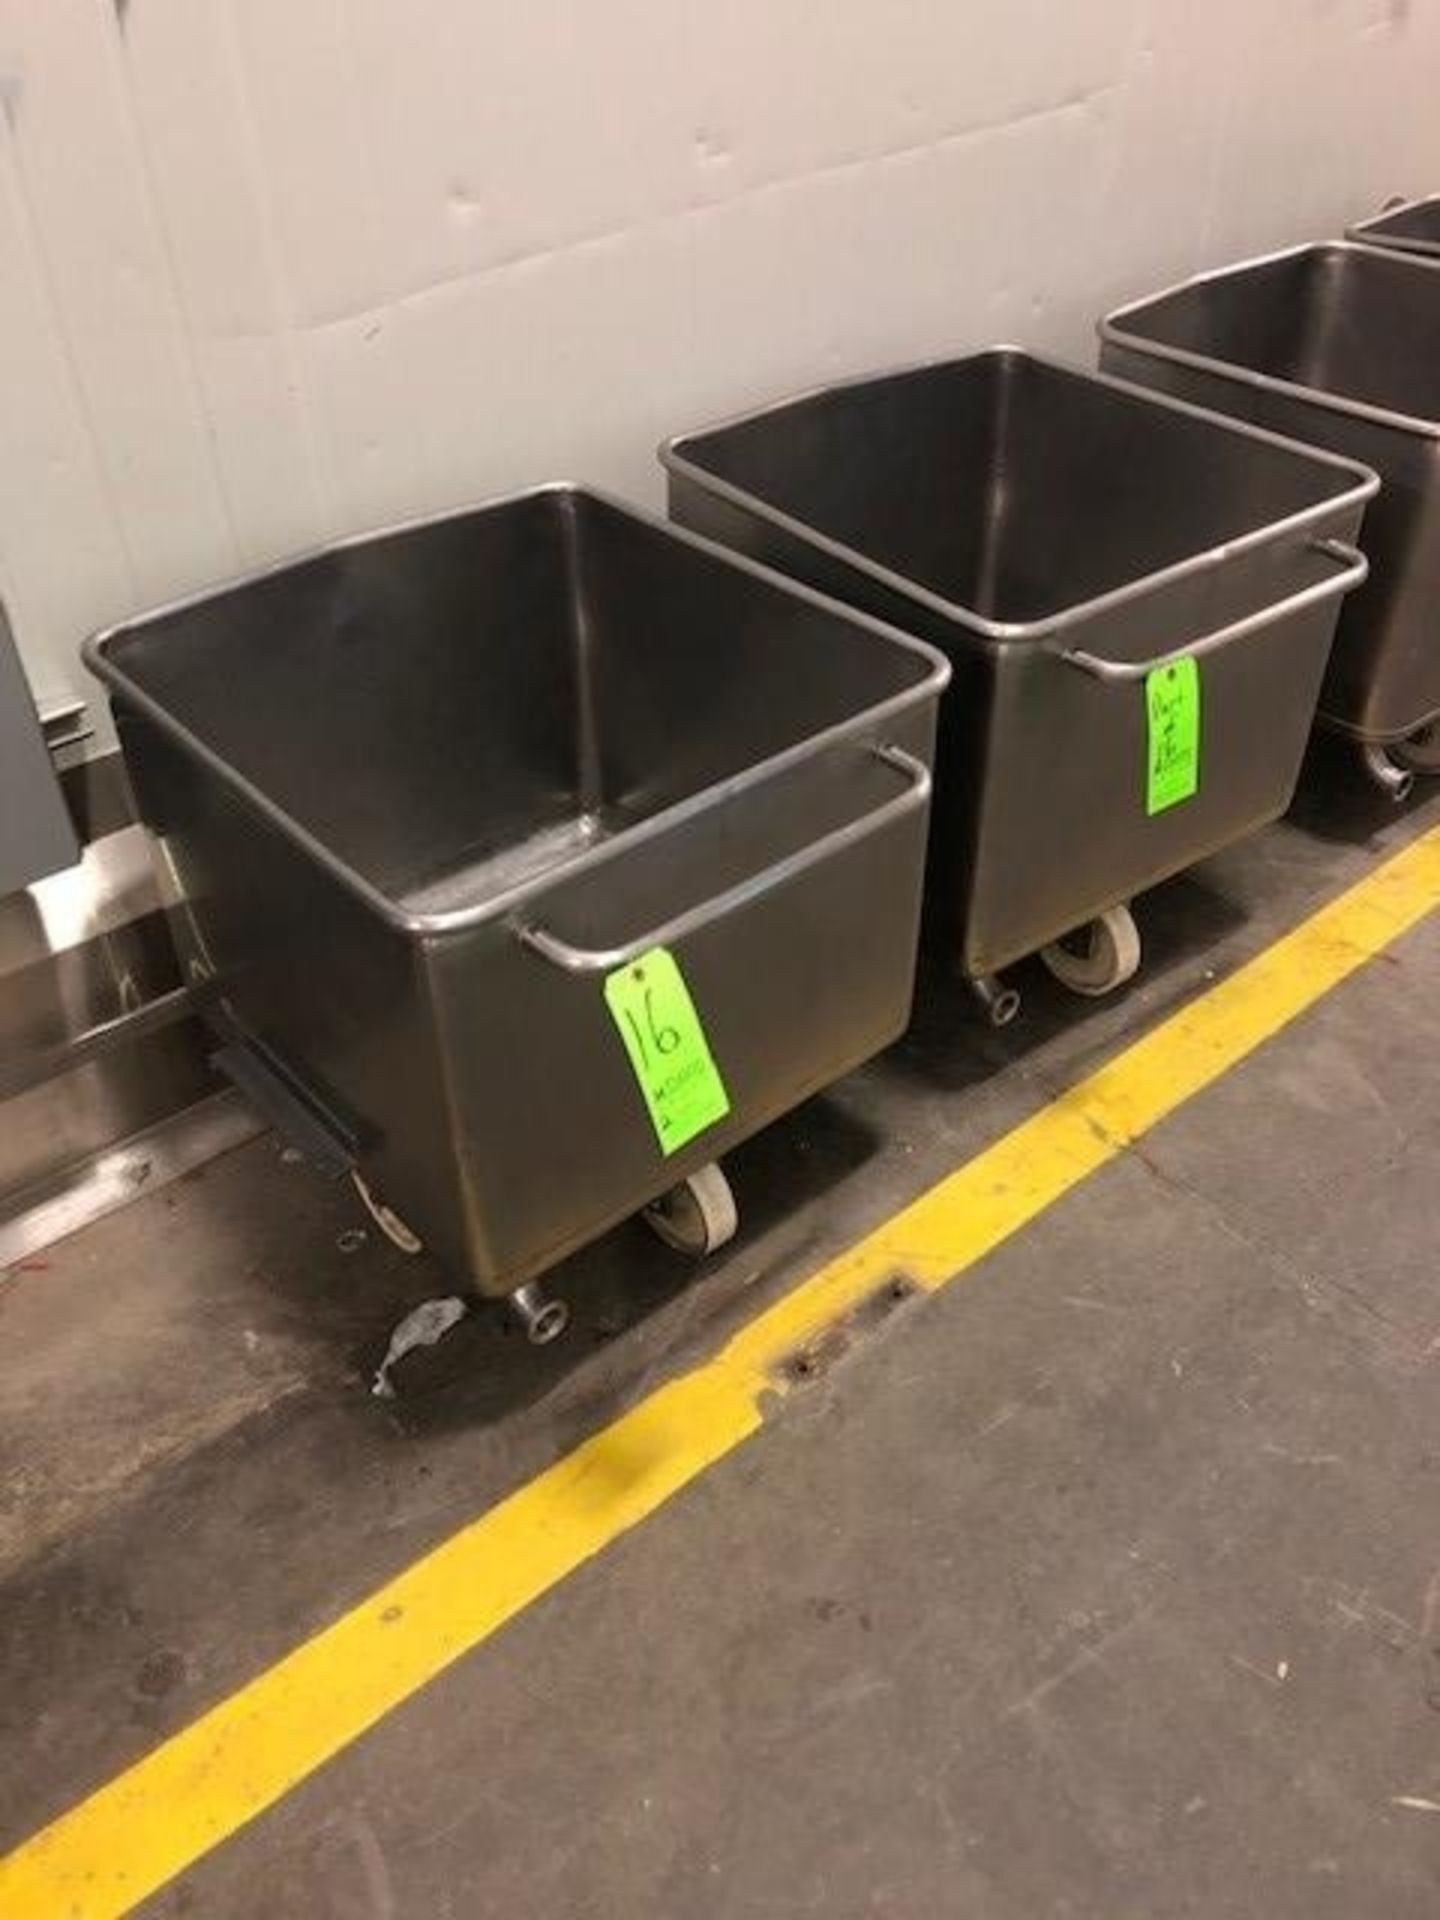 Portable S/S Dump Totes, Internal Dims.: Aprox. 25" L x 25" W x 19" Deep, Mounted on Casters